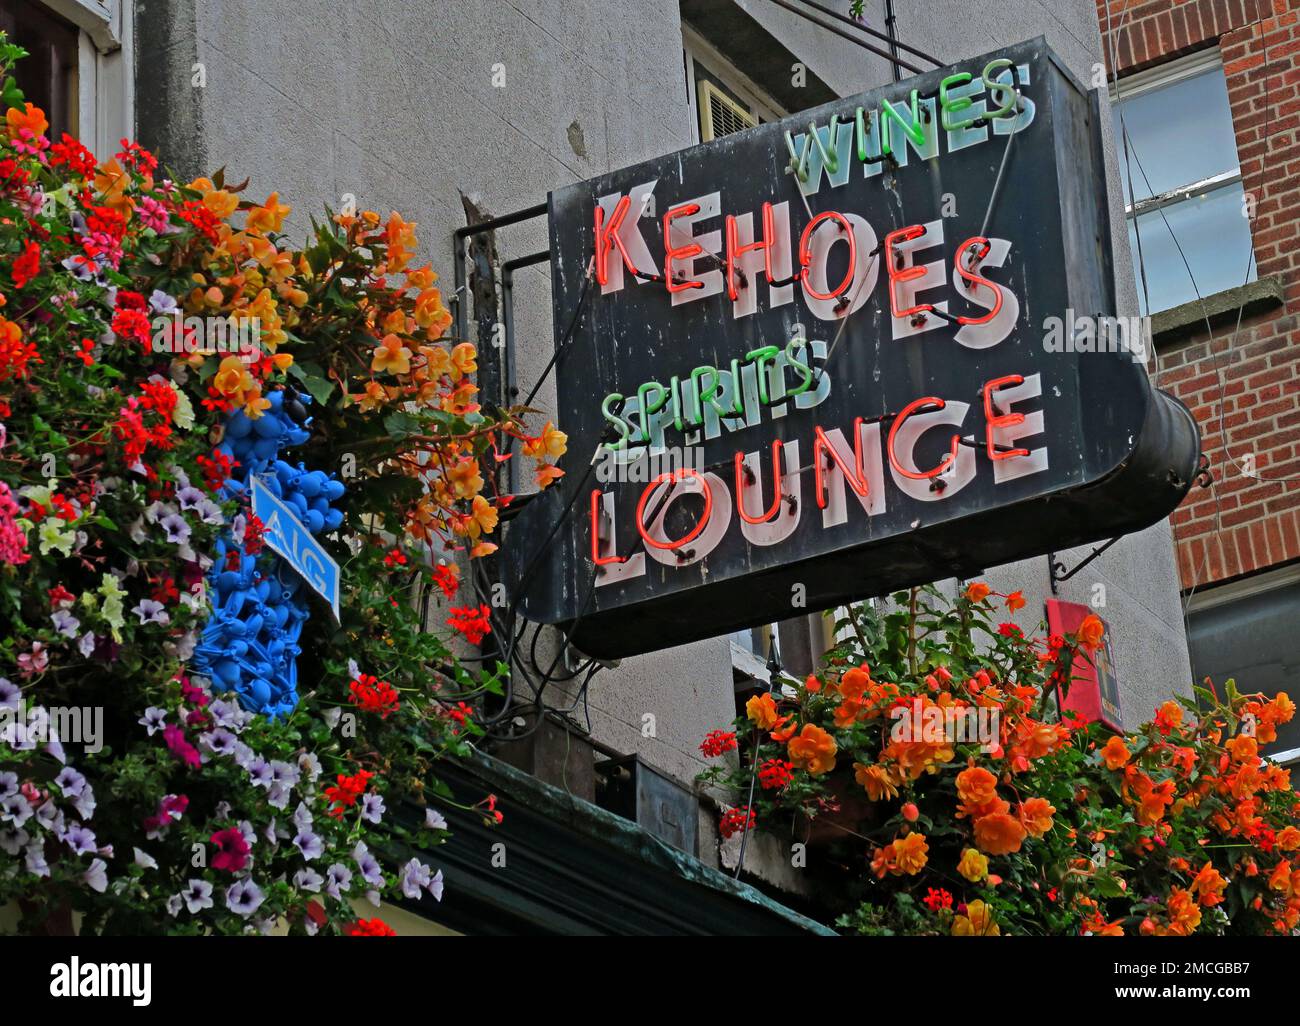 Kehoes Lounge pub sign in neon, wines & spirits , traditional Irish watering hole, 9 Anne St S, Dublin, Eire, D02 NY88, Ireland Stock Photo